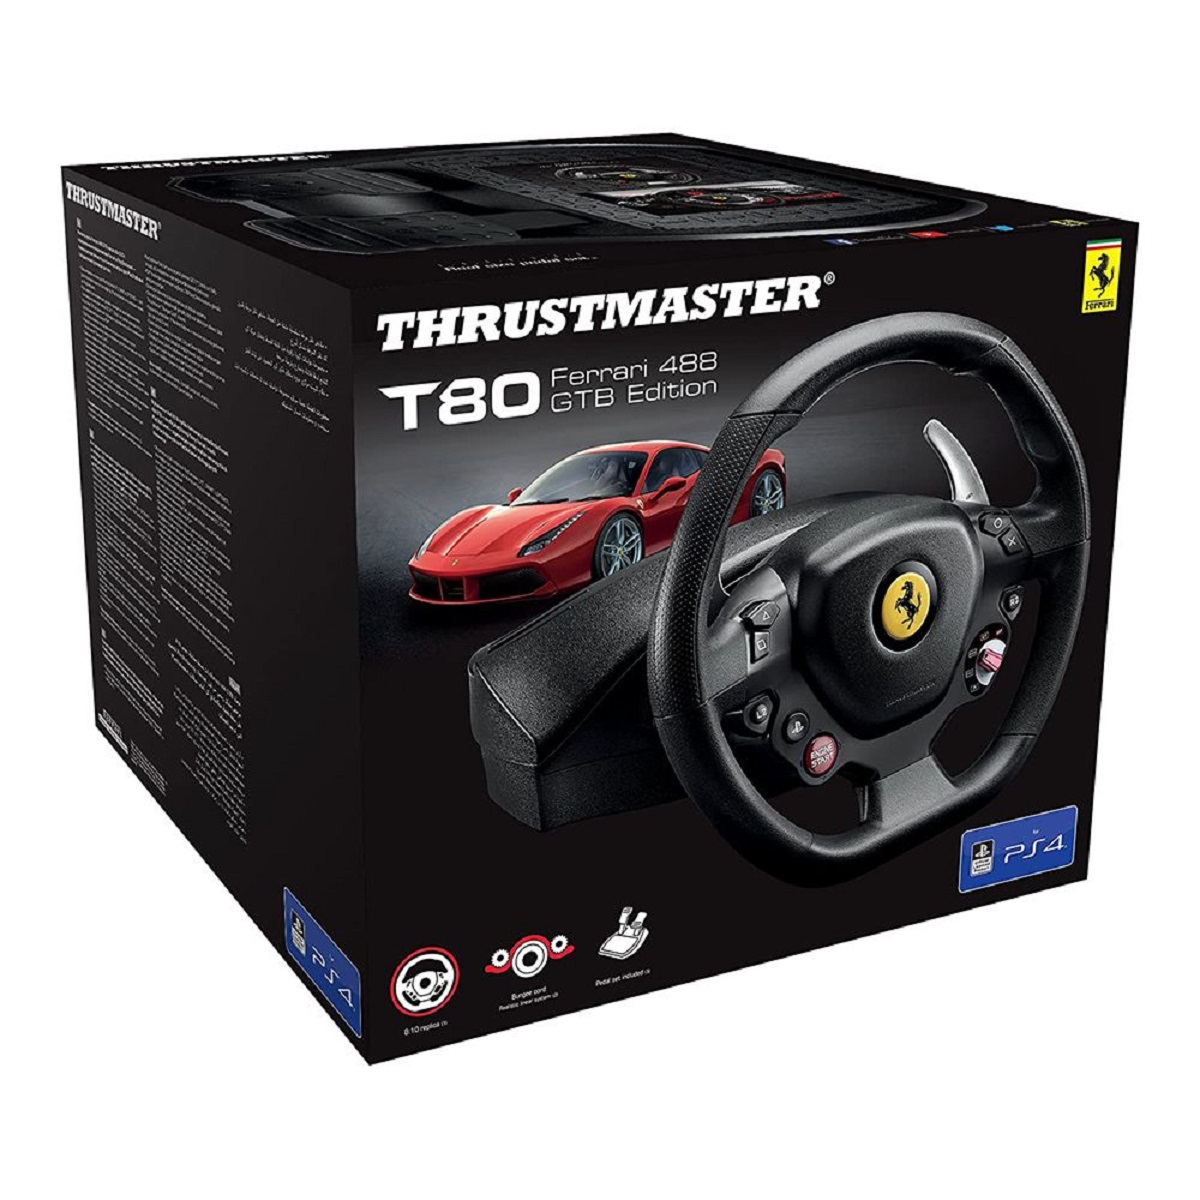 which-video-games-work-on-the-thrustmaster-t80-ps4-officially-licensed-racing-wheel